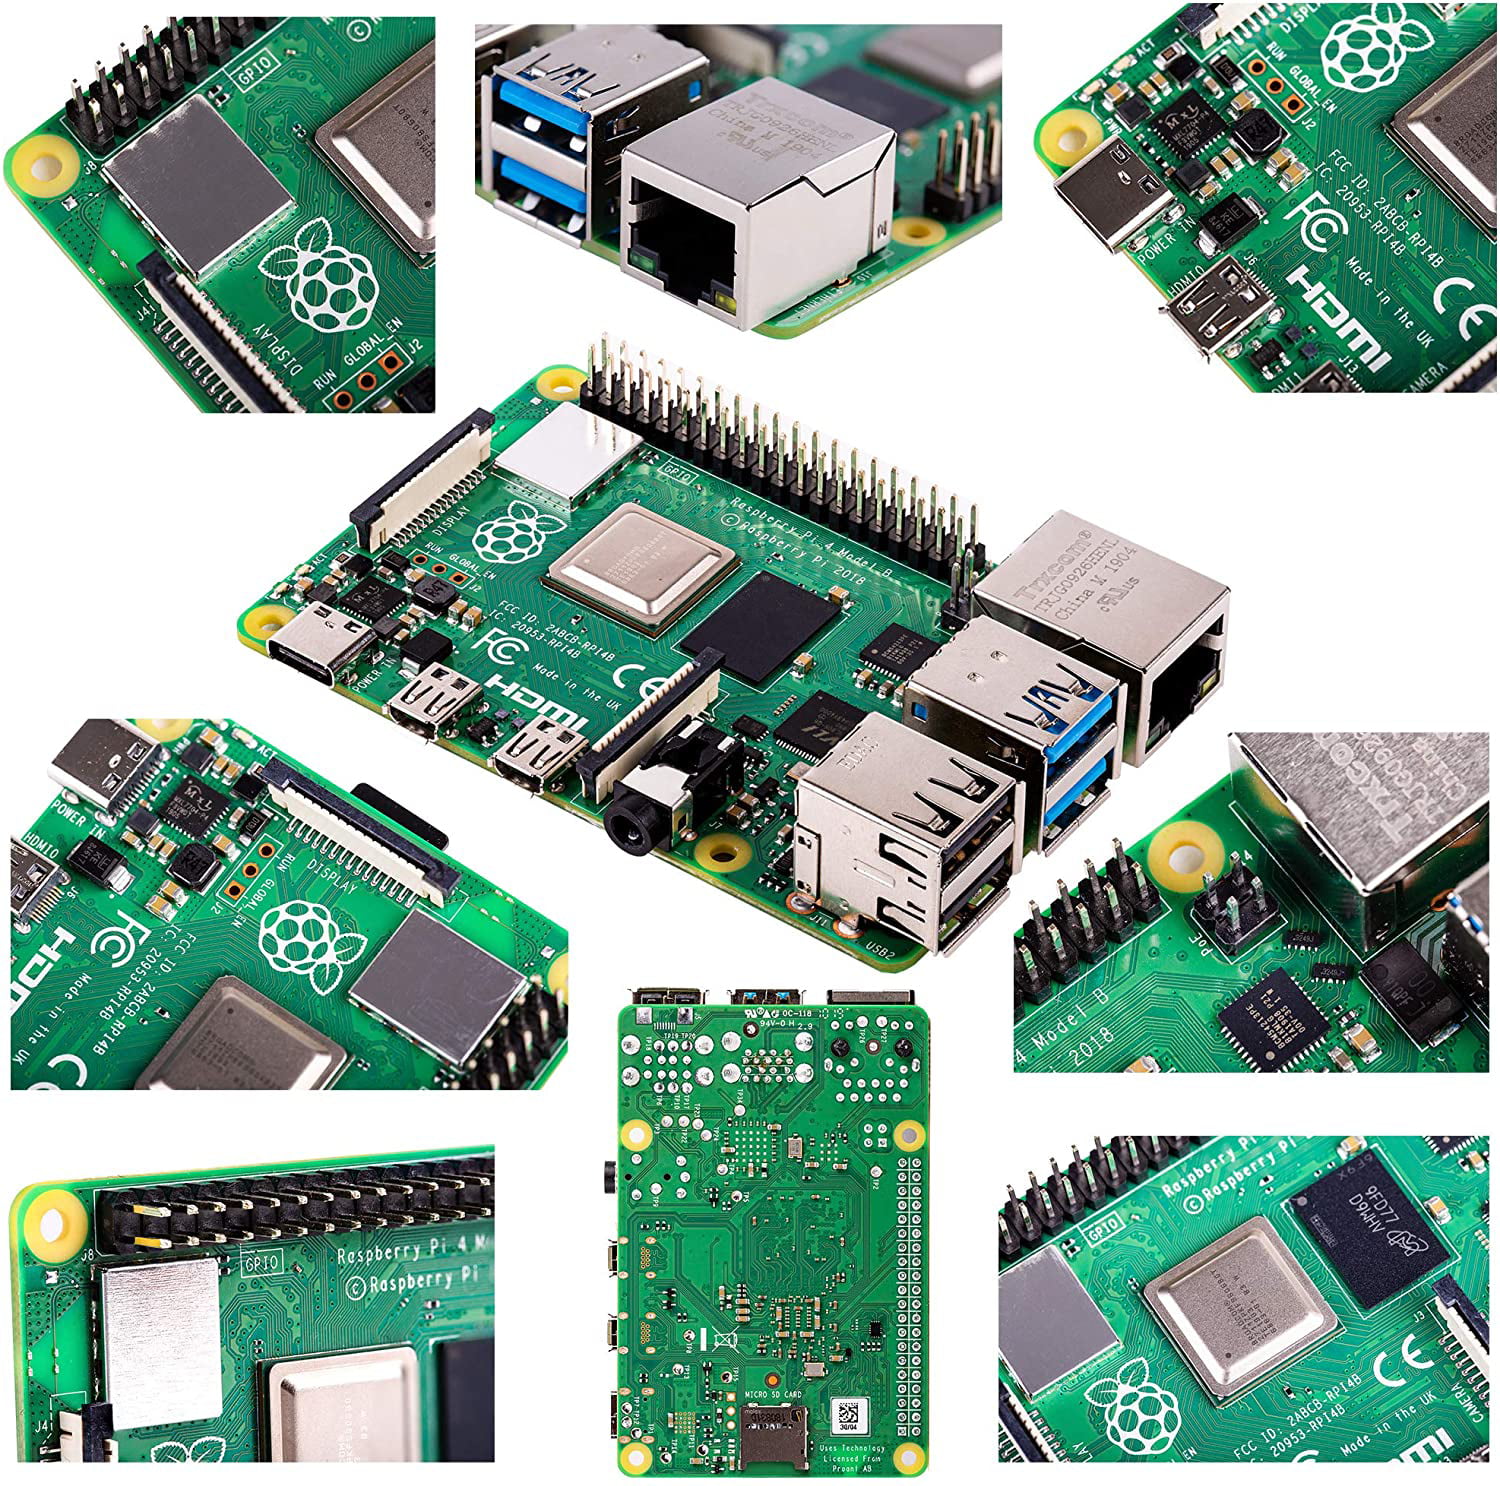 Vilros Raspberry PI 4 Model B Complete Desktop Kit with Mini Keyboard and Touchpad Combo 2GB RAM